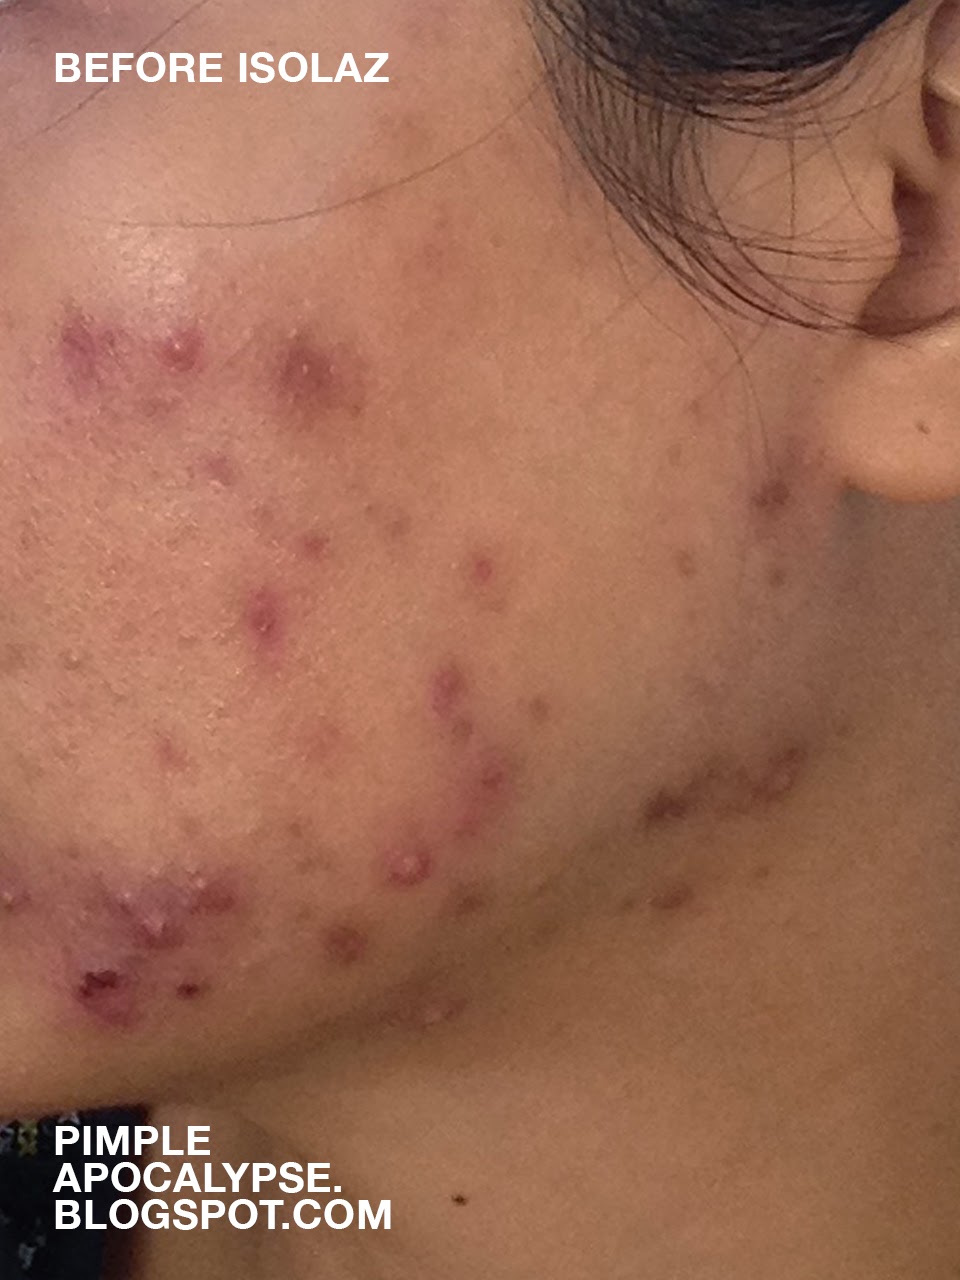 Pimple Apocalypse My Experience With Isolaz And Laser Genesis